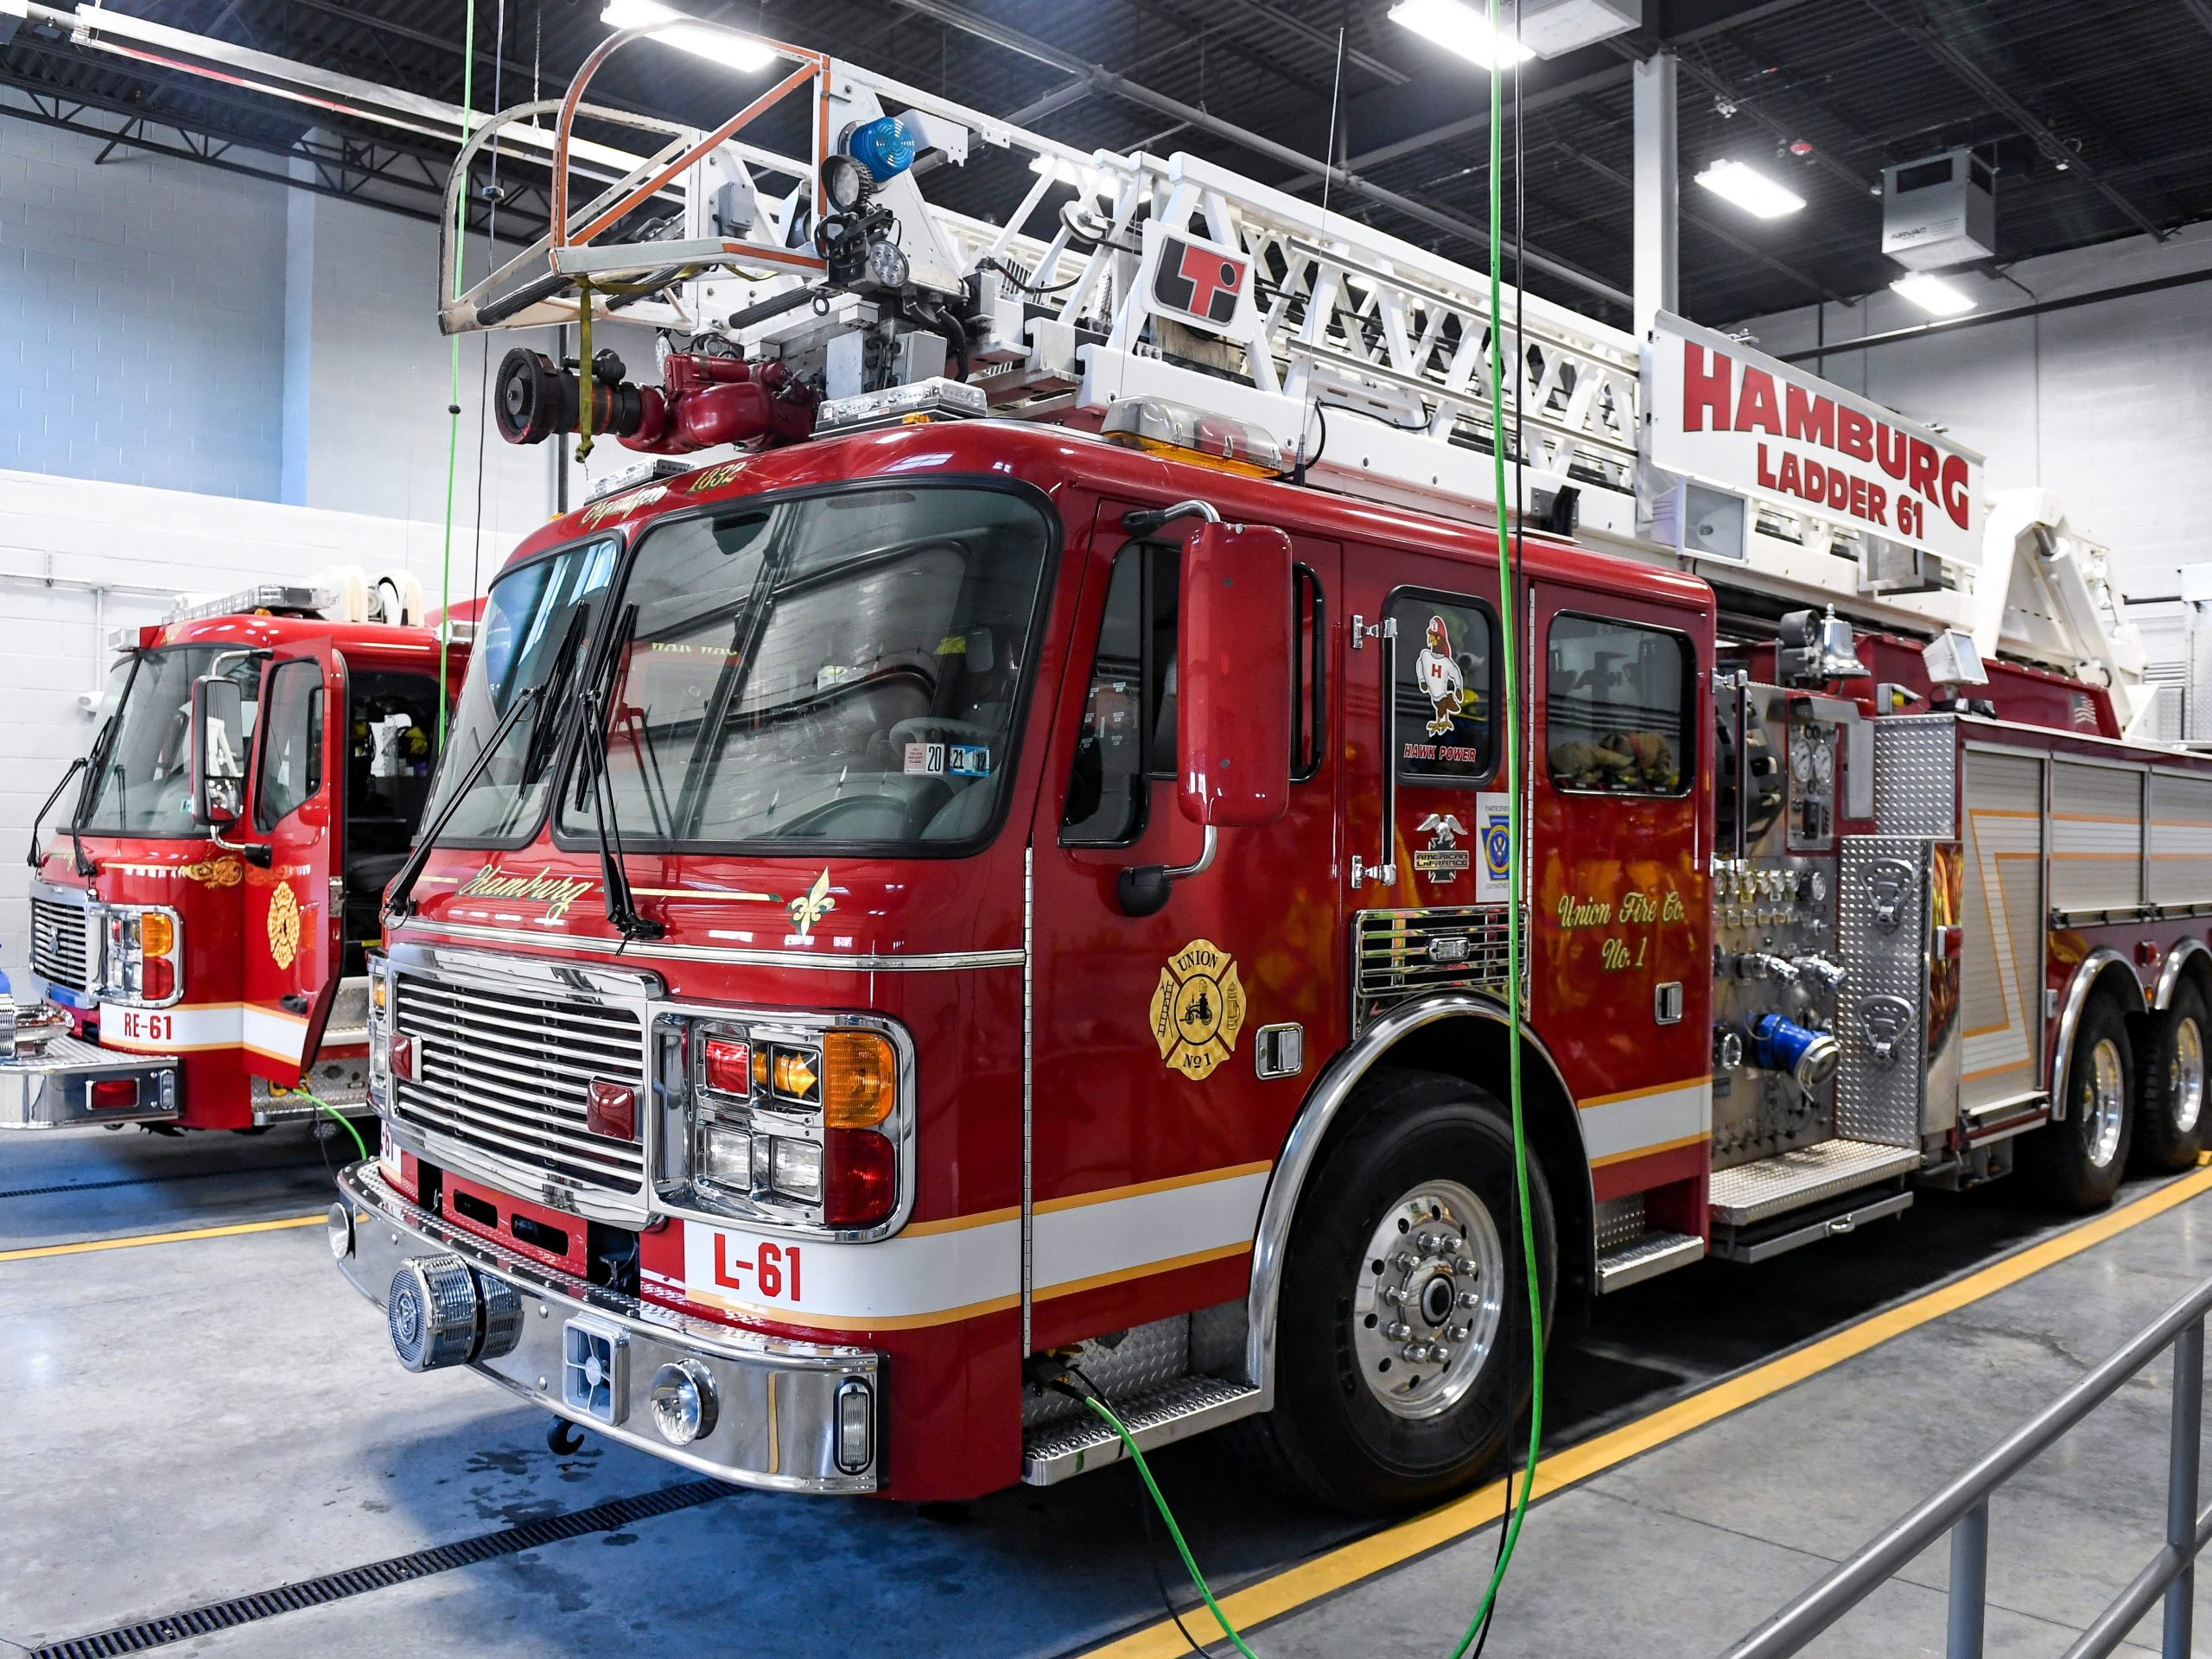 The trucks in the new bay at the station. At Union Fire Company #1 of Hamburg on South 4th Street in Hamburg PA Tuesday morning April 6, 2021.